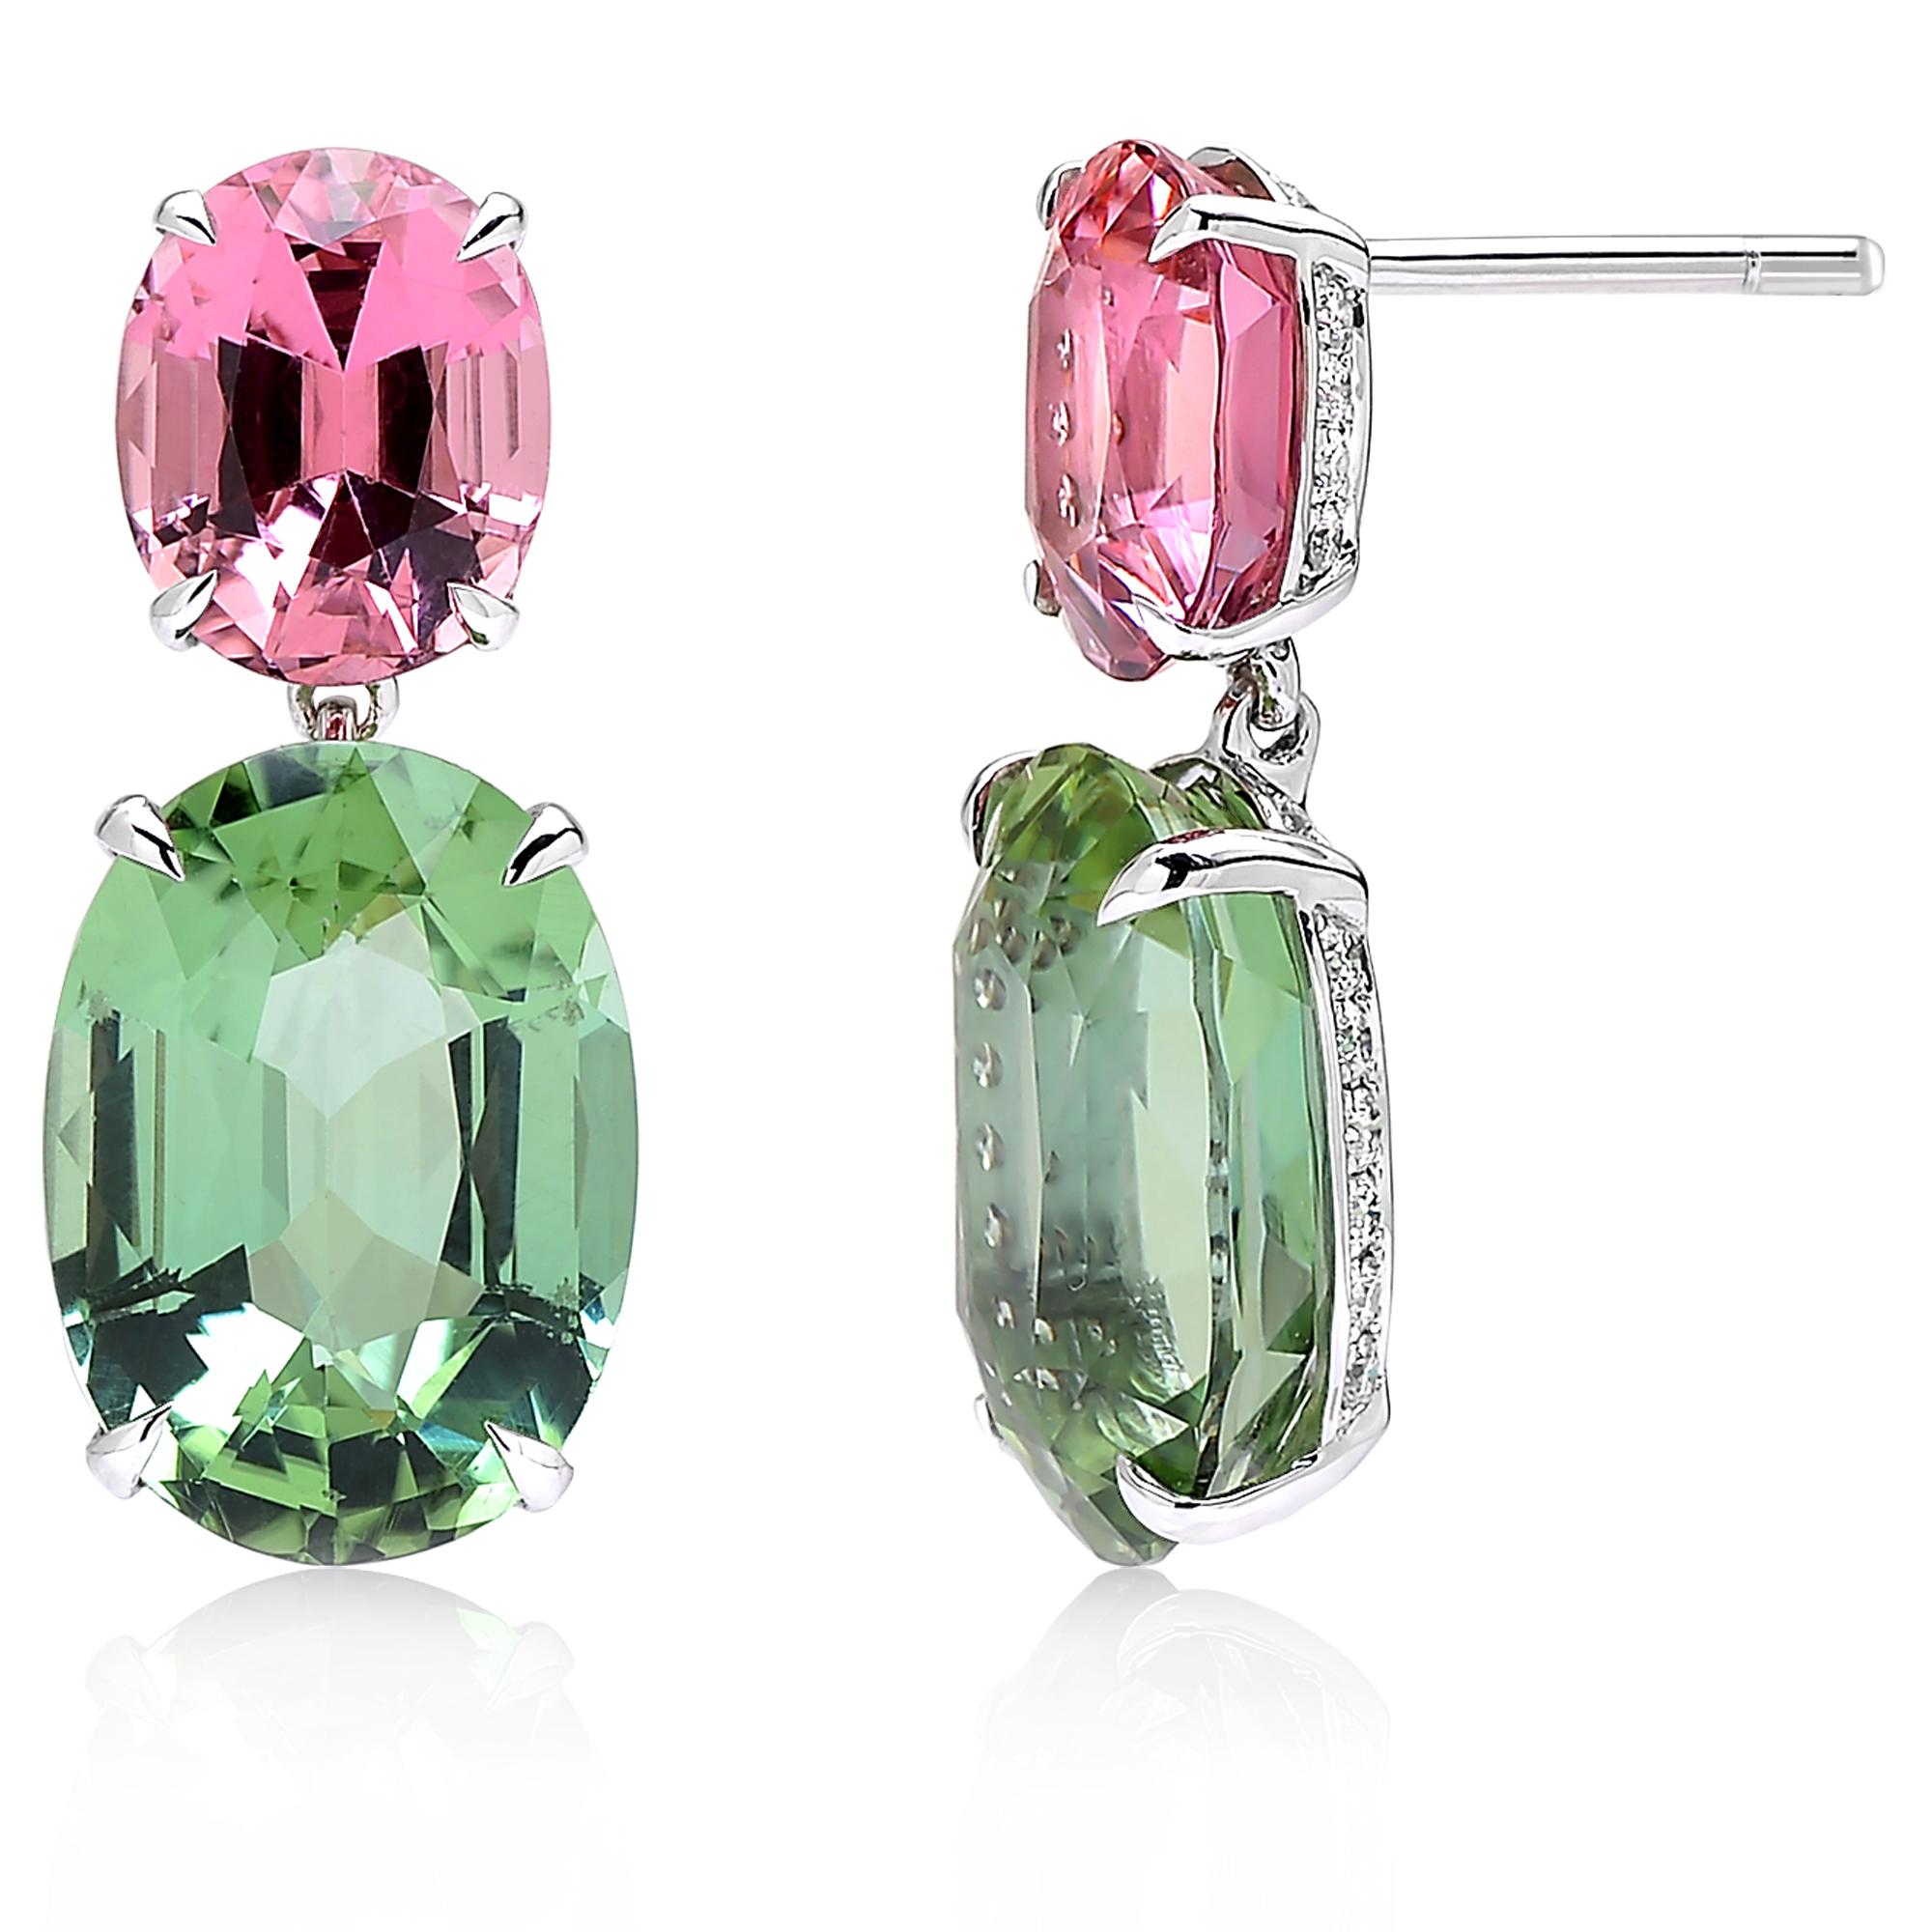 One of a kind oval-cut pink tourmaline and oval-cut mint tourmaline earrings set in 18 karat white gold with round, brilliant diamond detailing. 

Clean lines, great proportions and minimum weight were carefully designed for the comfort of the